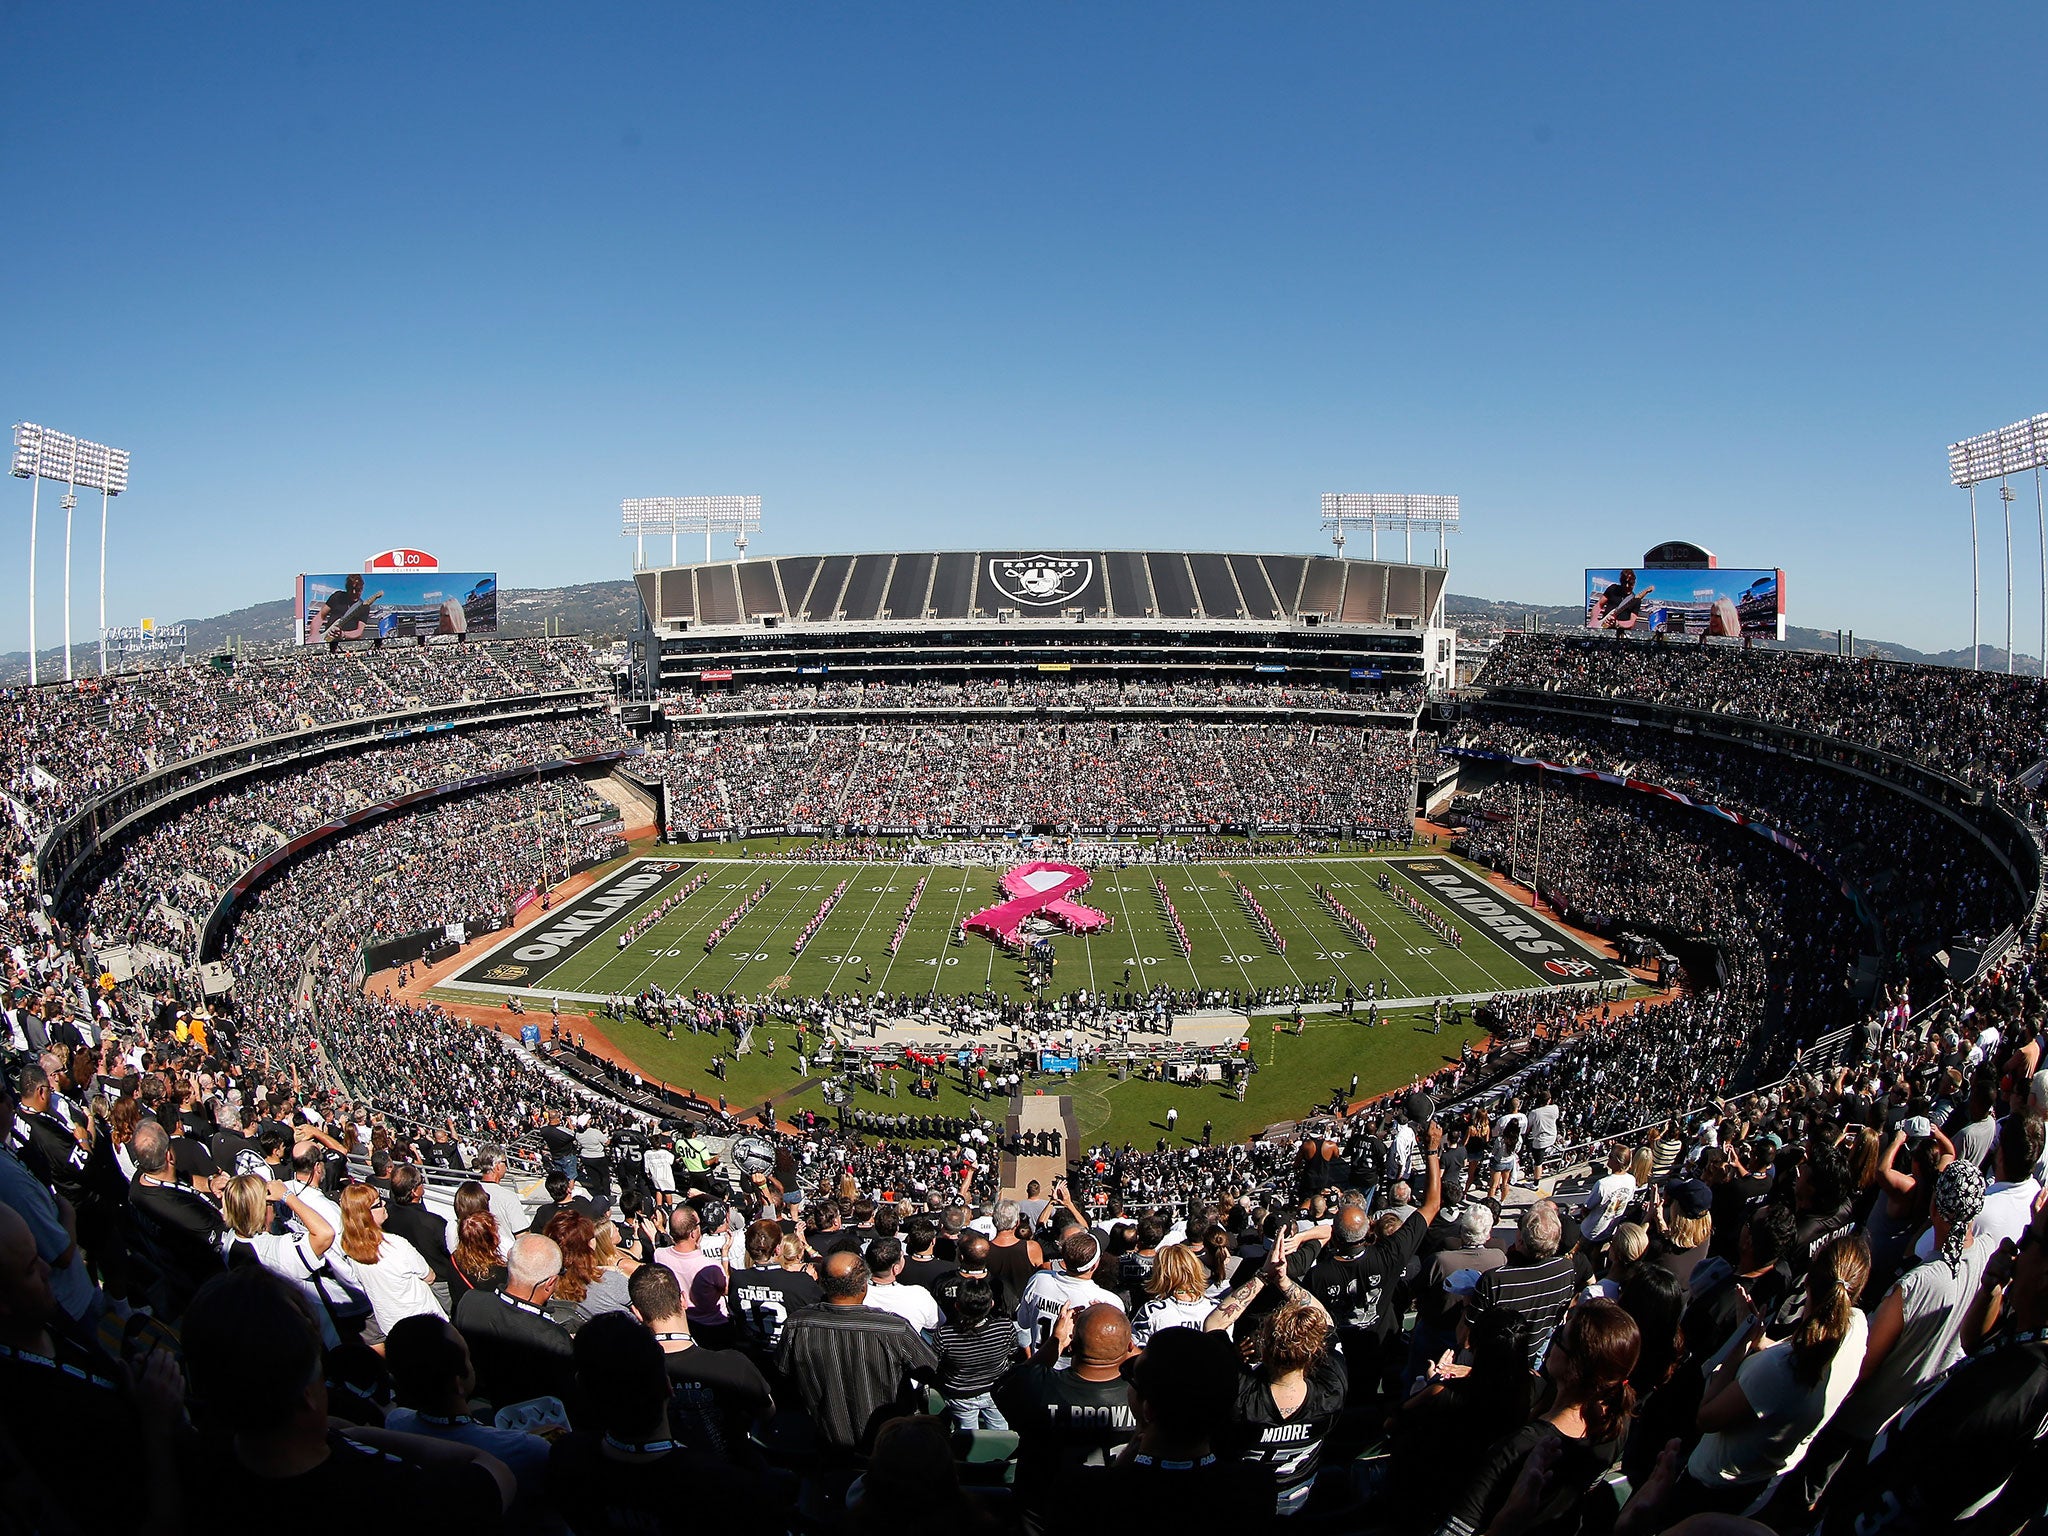 The Raiders are leaving Oakland in favour of a new home in Las Vegas